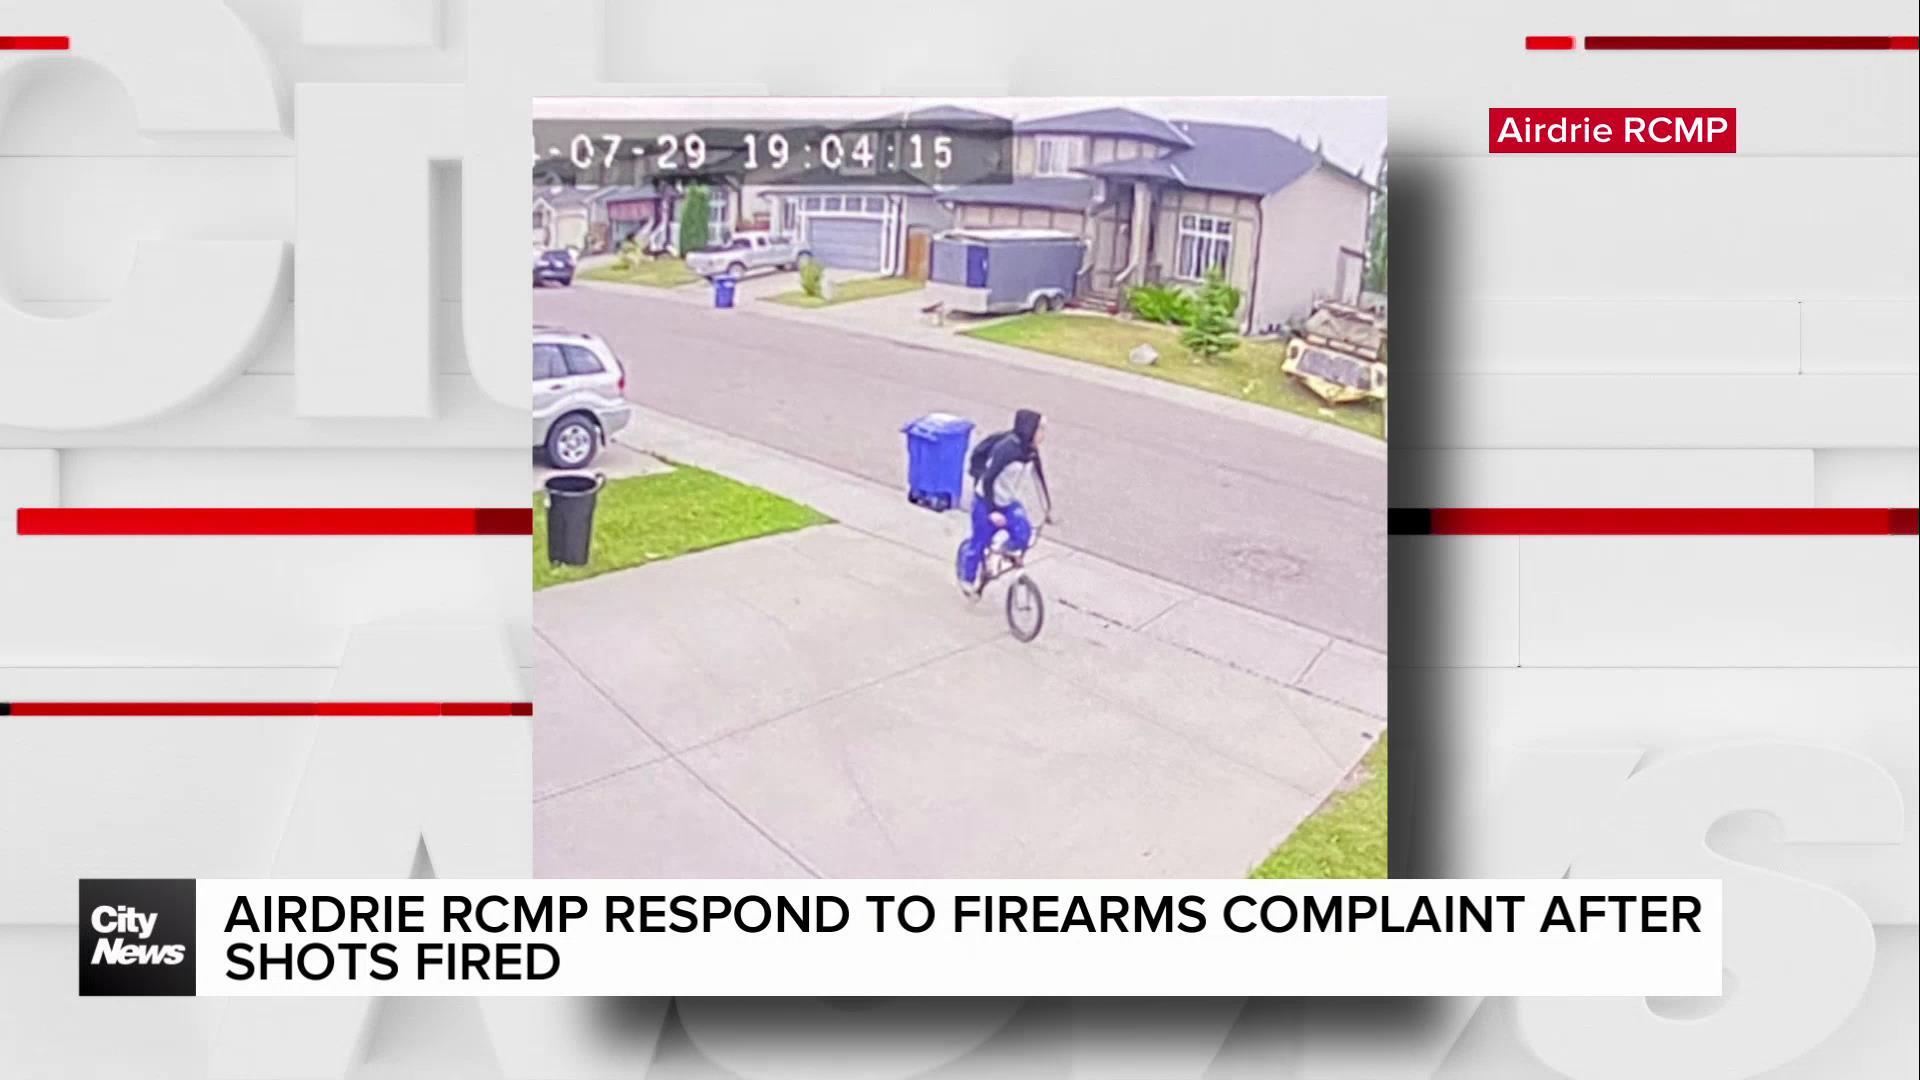 Airdrie RCMP respond to firearms complaint after shots fired